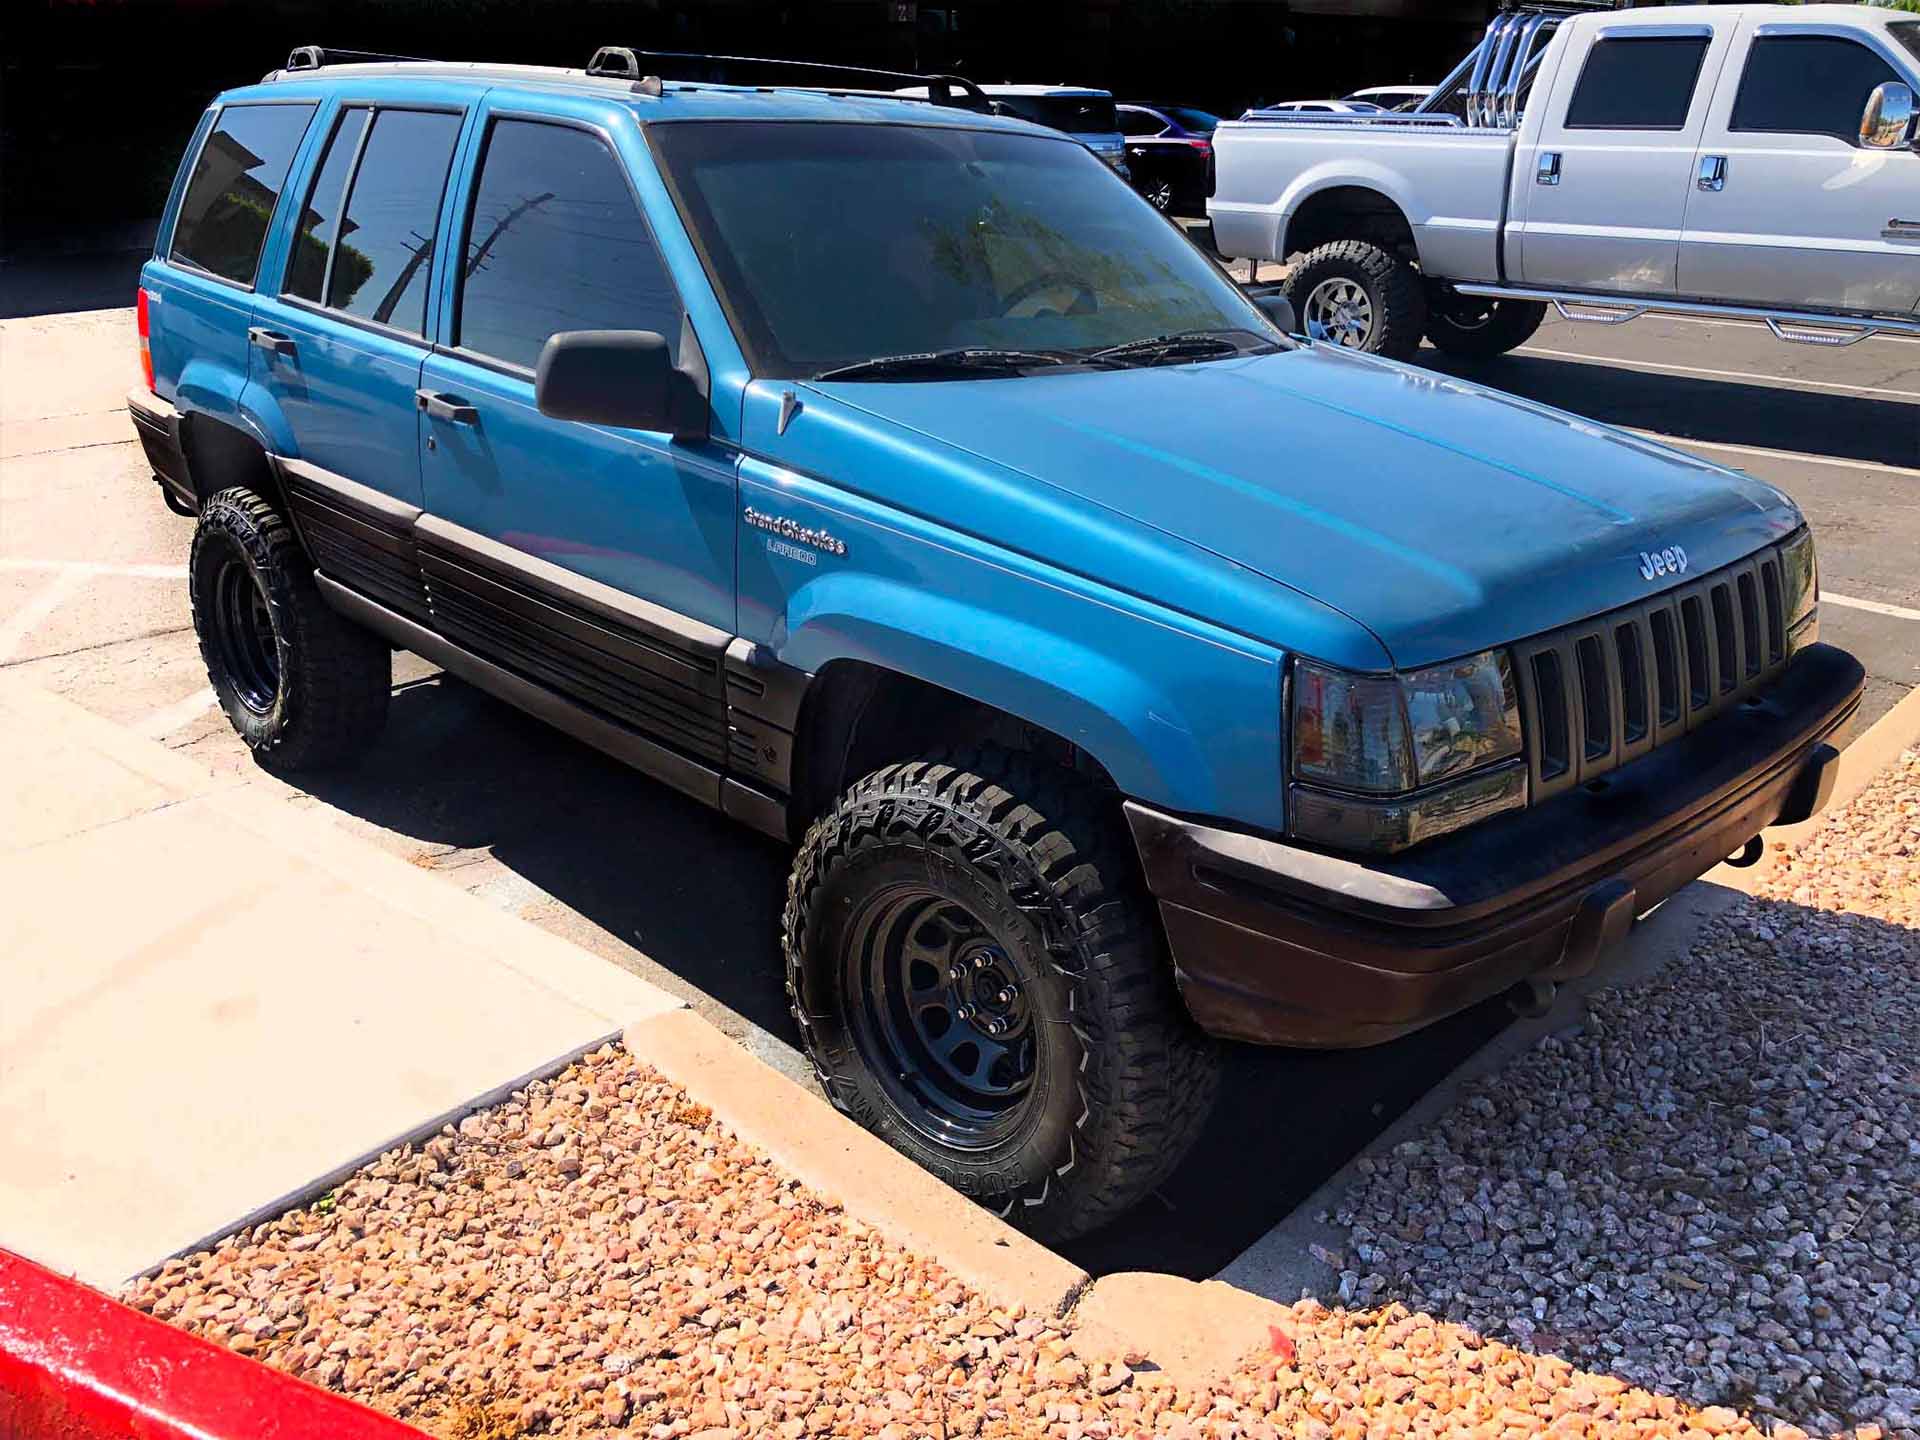 1994 Jeep Grand Cheerokee after